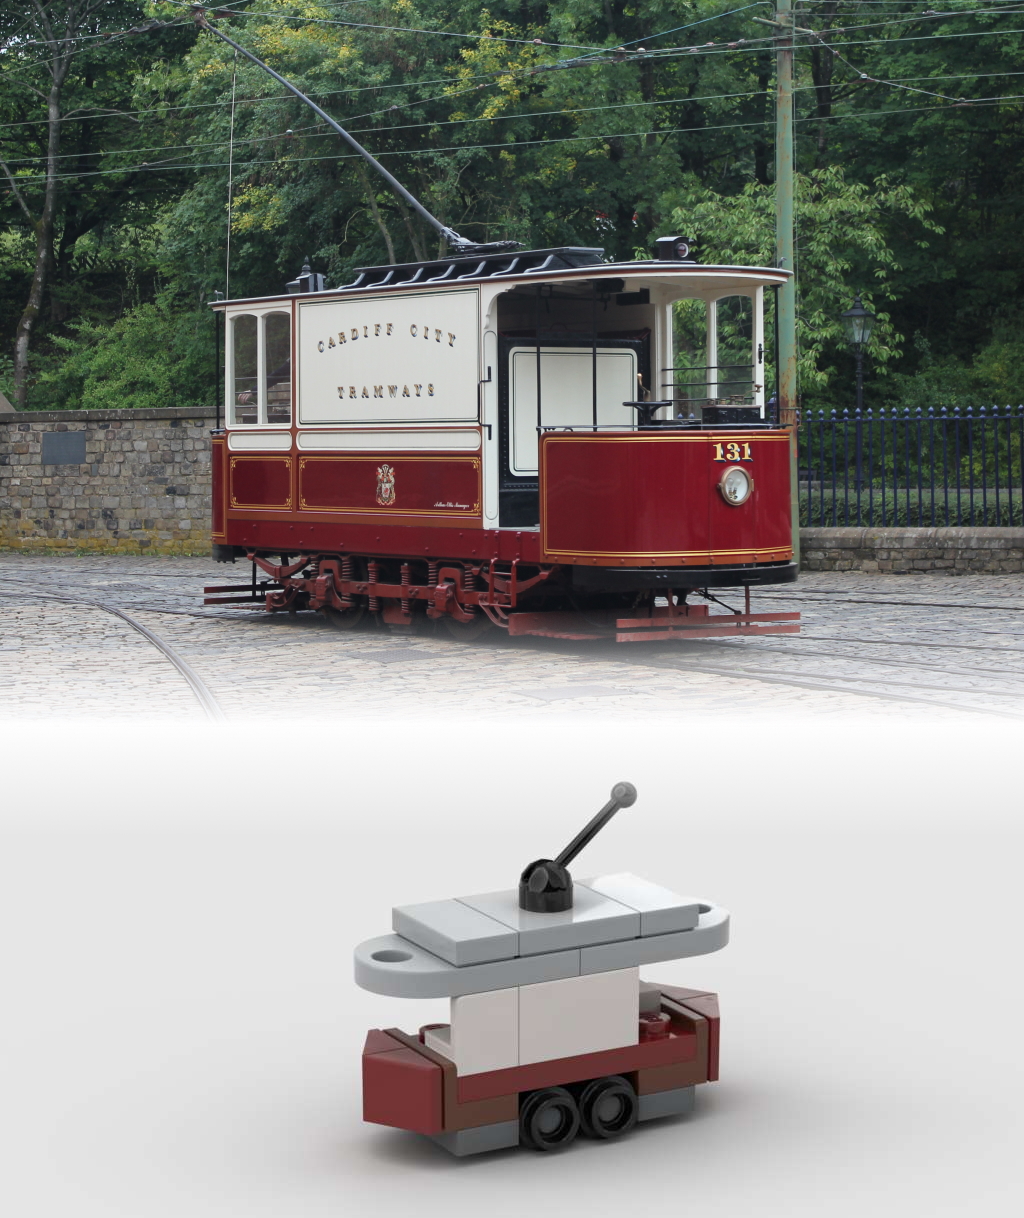 Comparison images of the miniature LEGO Cardiff tram 131 and the real thing